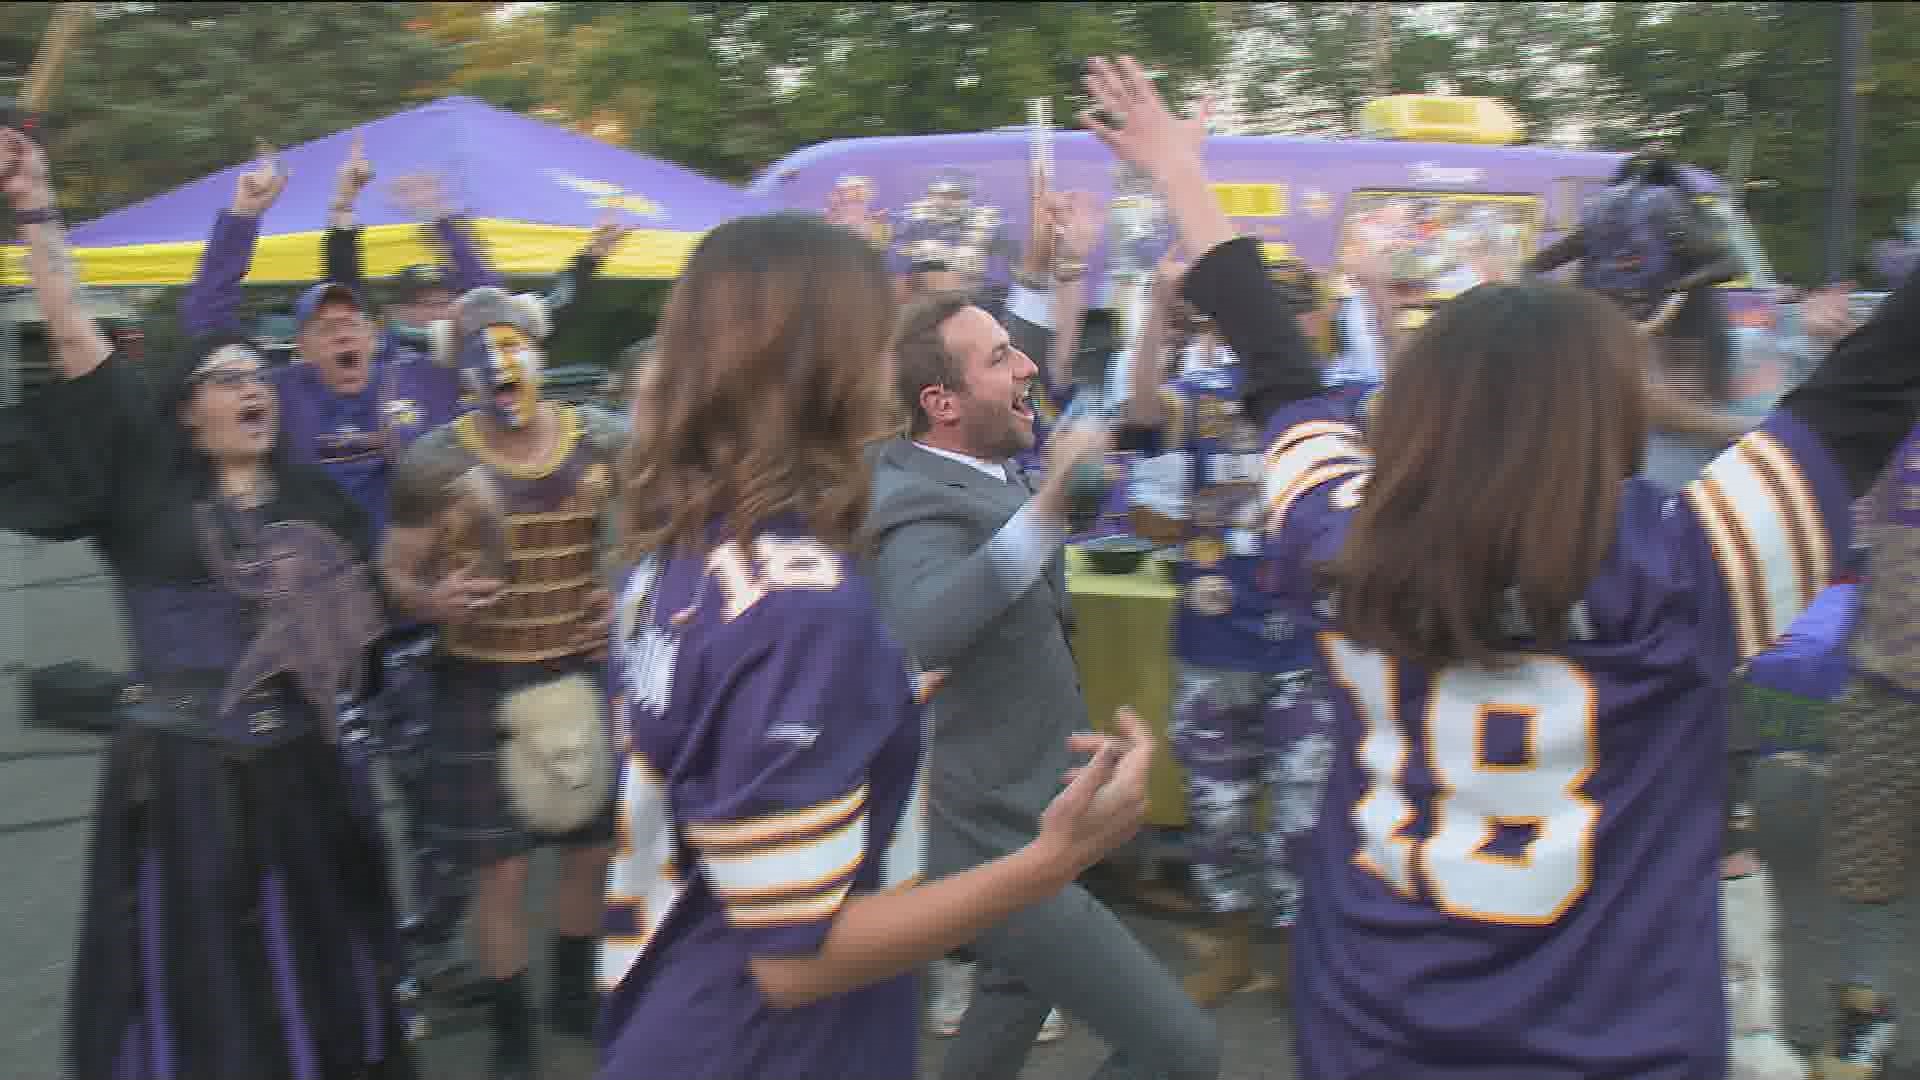 What a way to end the week, with a #Sunrisers OVER-THE-TOP tailgate bash to celebrate the kickoff of a new Vikings season!!!